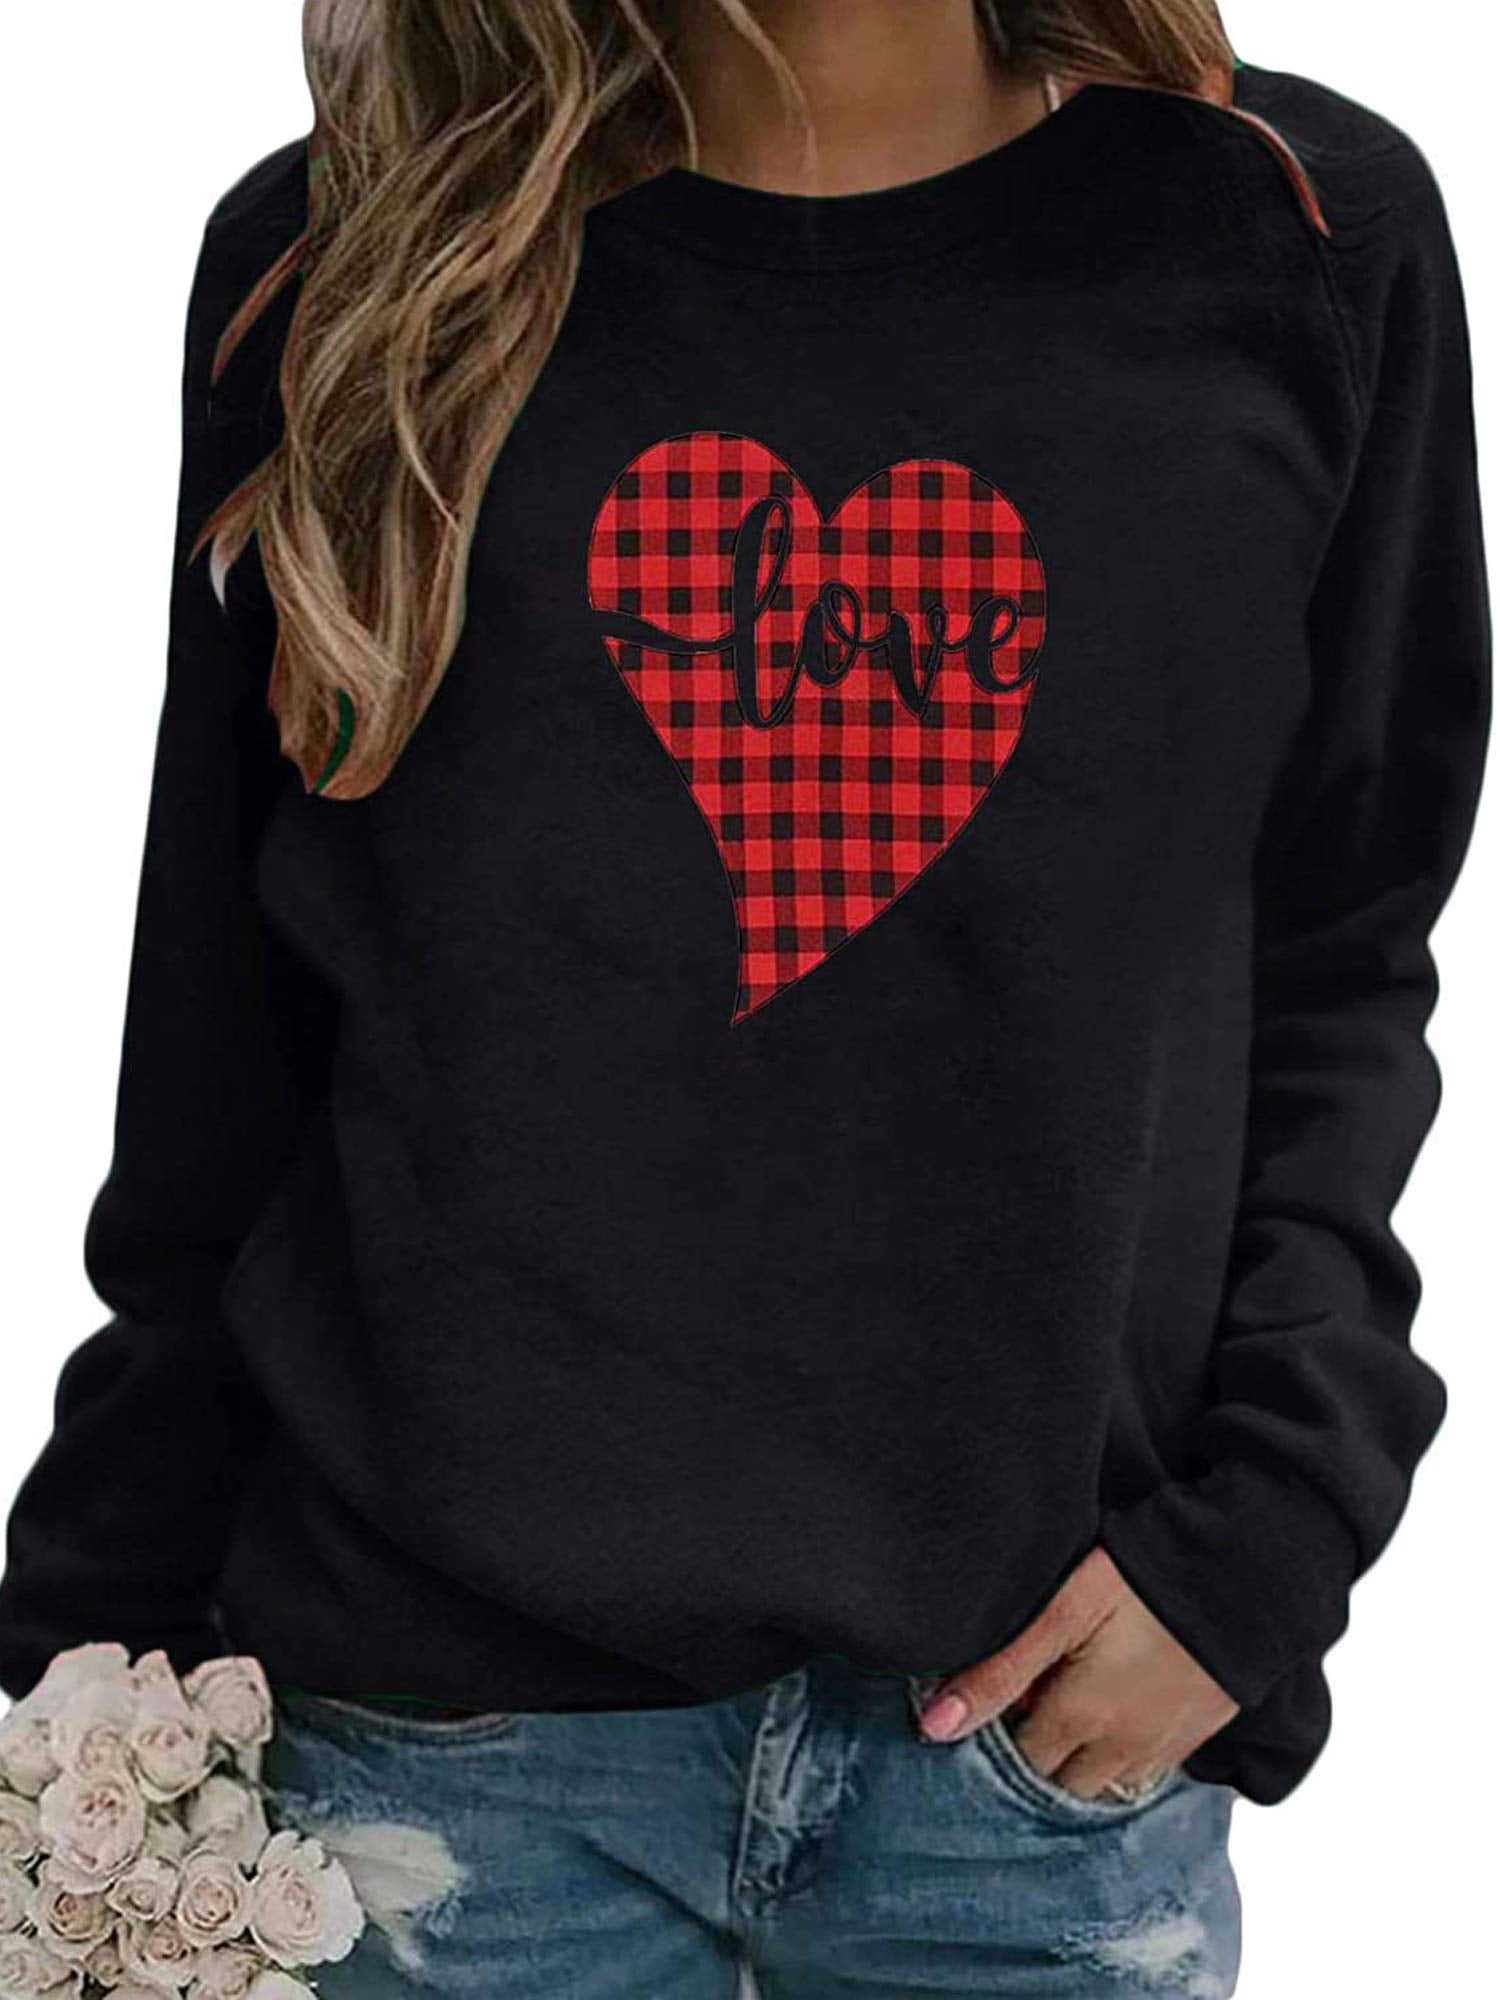 Valentine'S Day Heart Print Sweatshirts for Women Loose Crewneck Long Sleeve Tops Pullover Tie Dye Color Blouse T-Shirt 